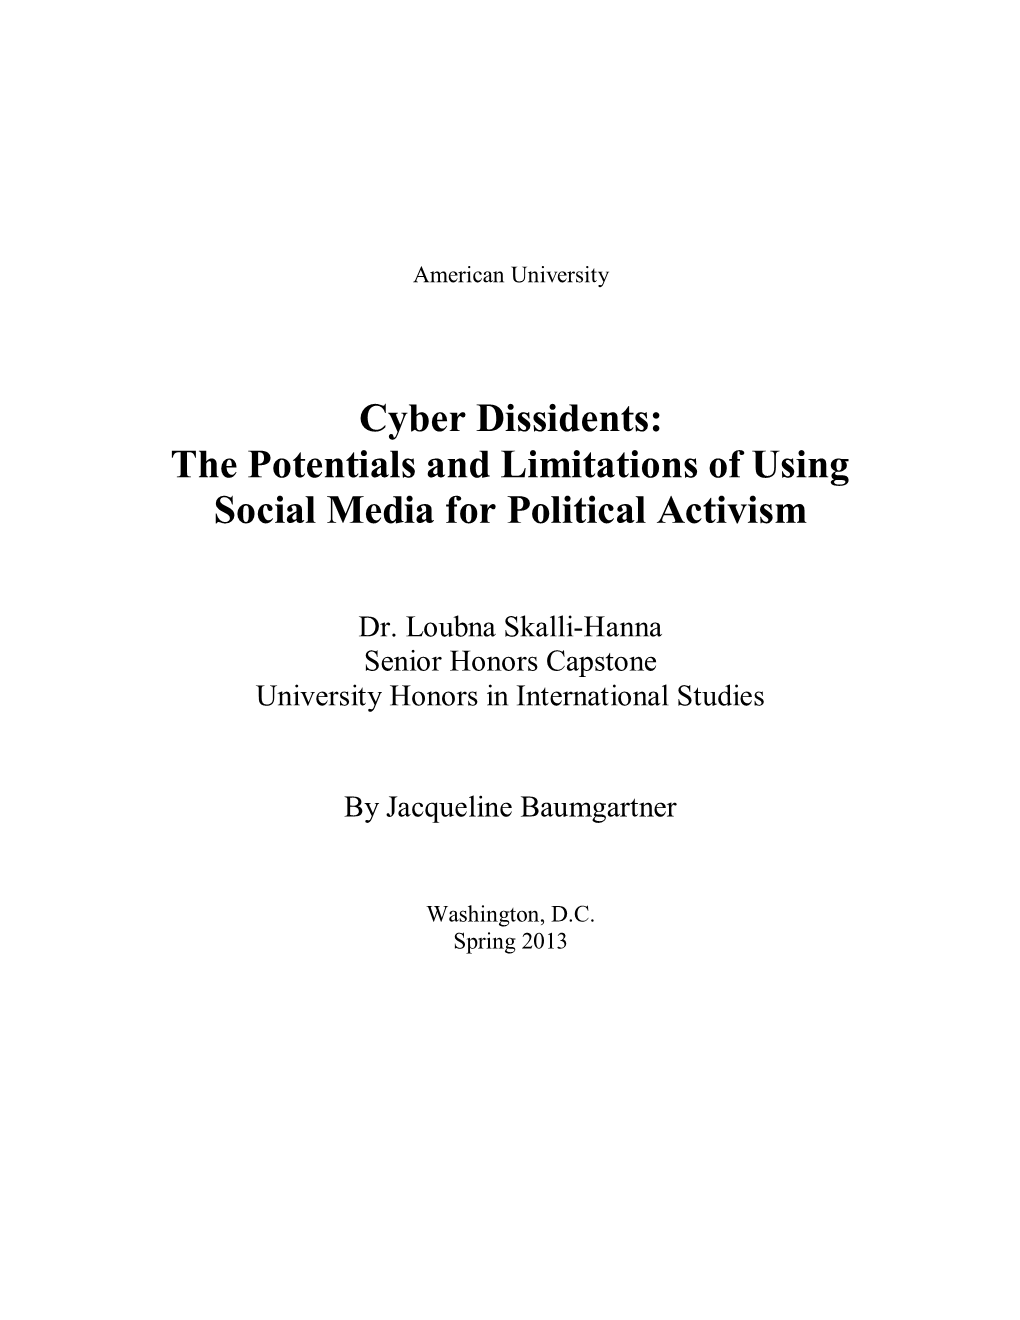 Cyber Dissidents: the Potentials and Limitations of Using Social Media for Political Activism